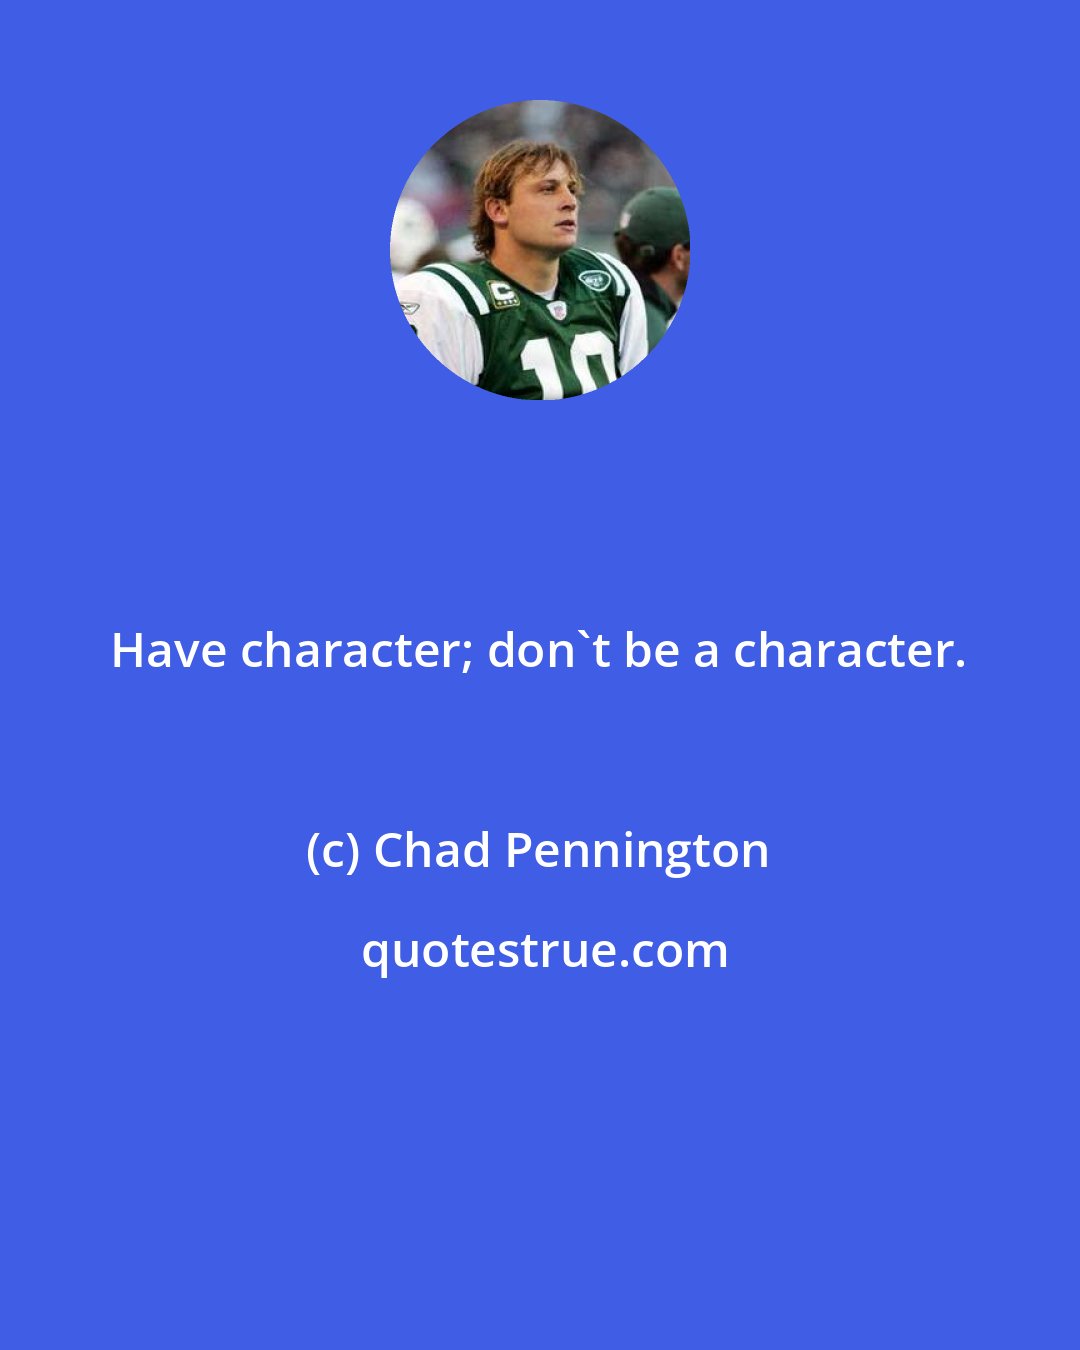 Chad Pennington: Have character; don't be a character.